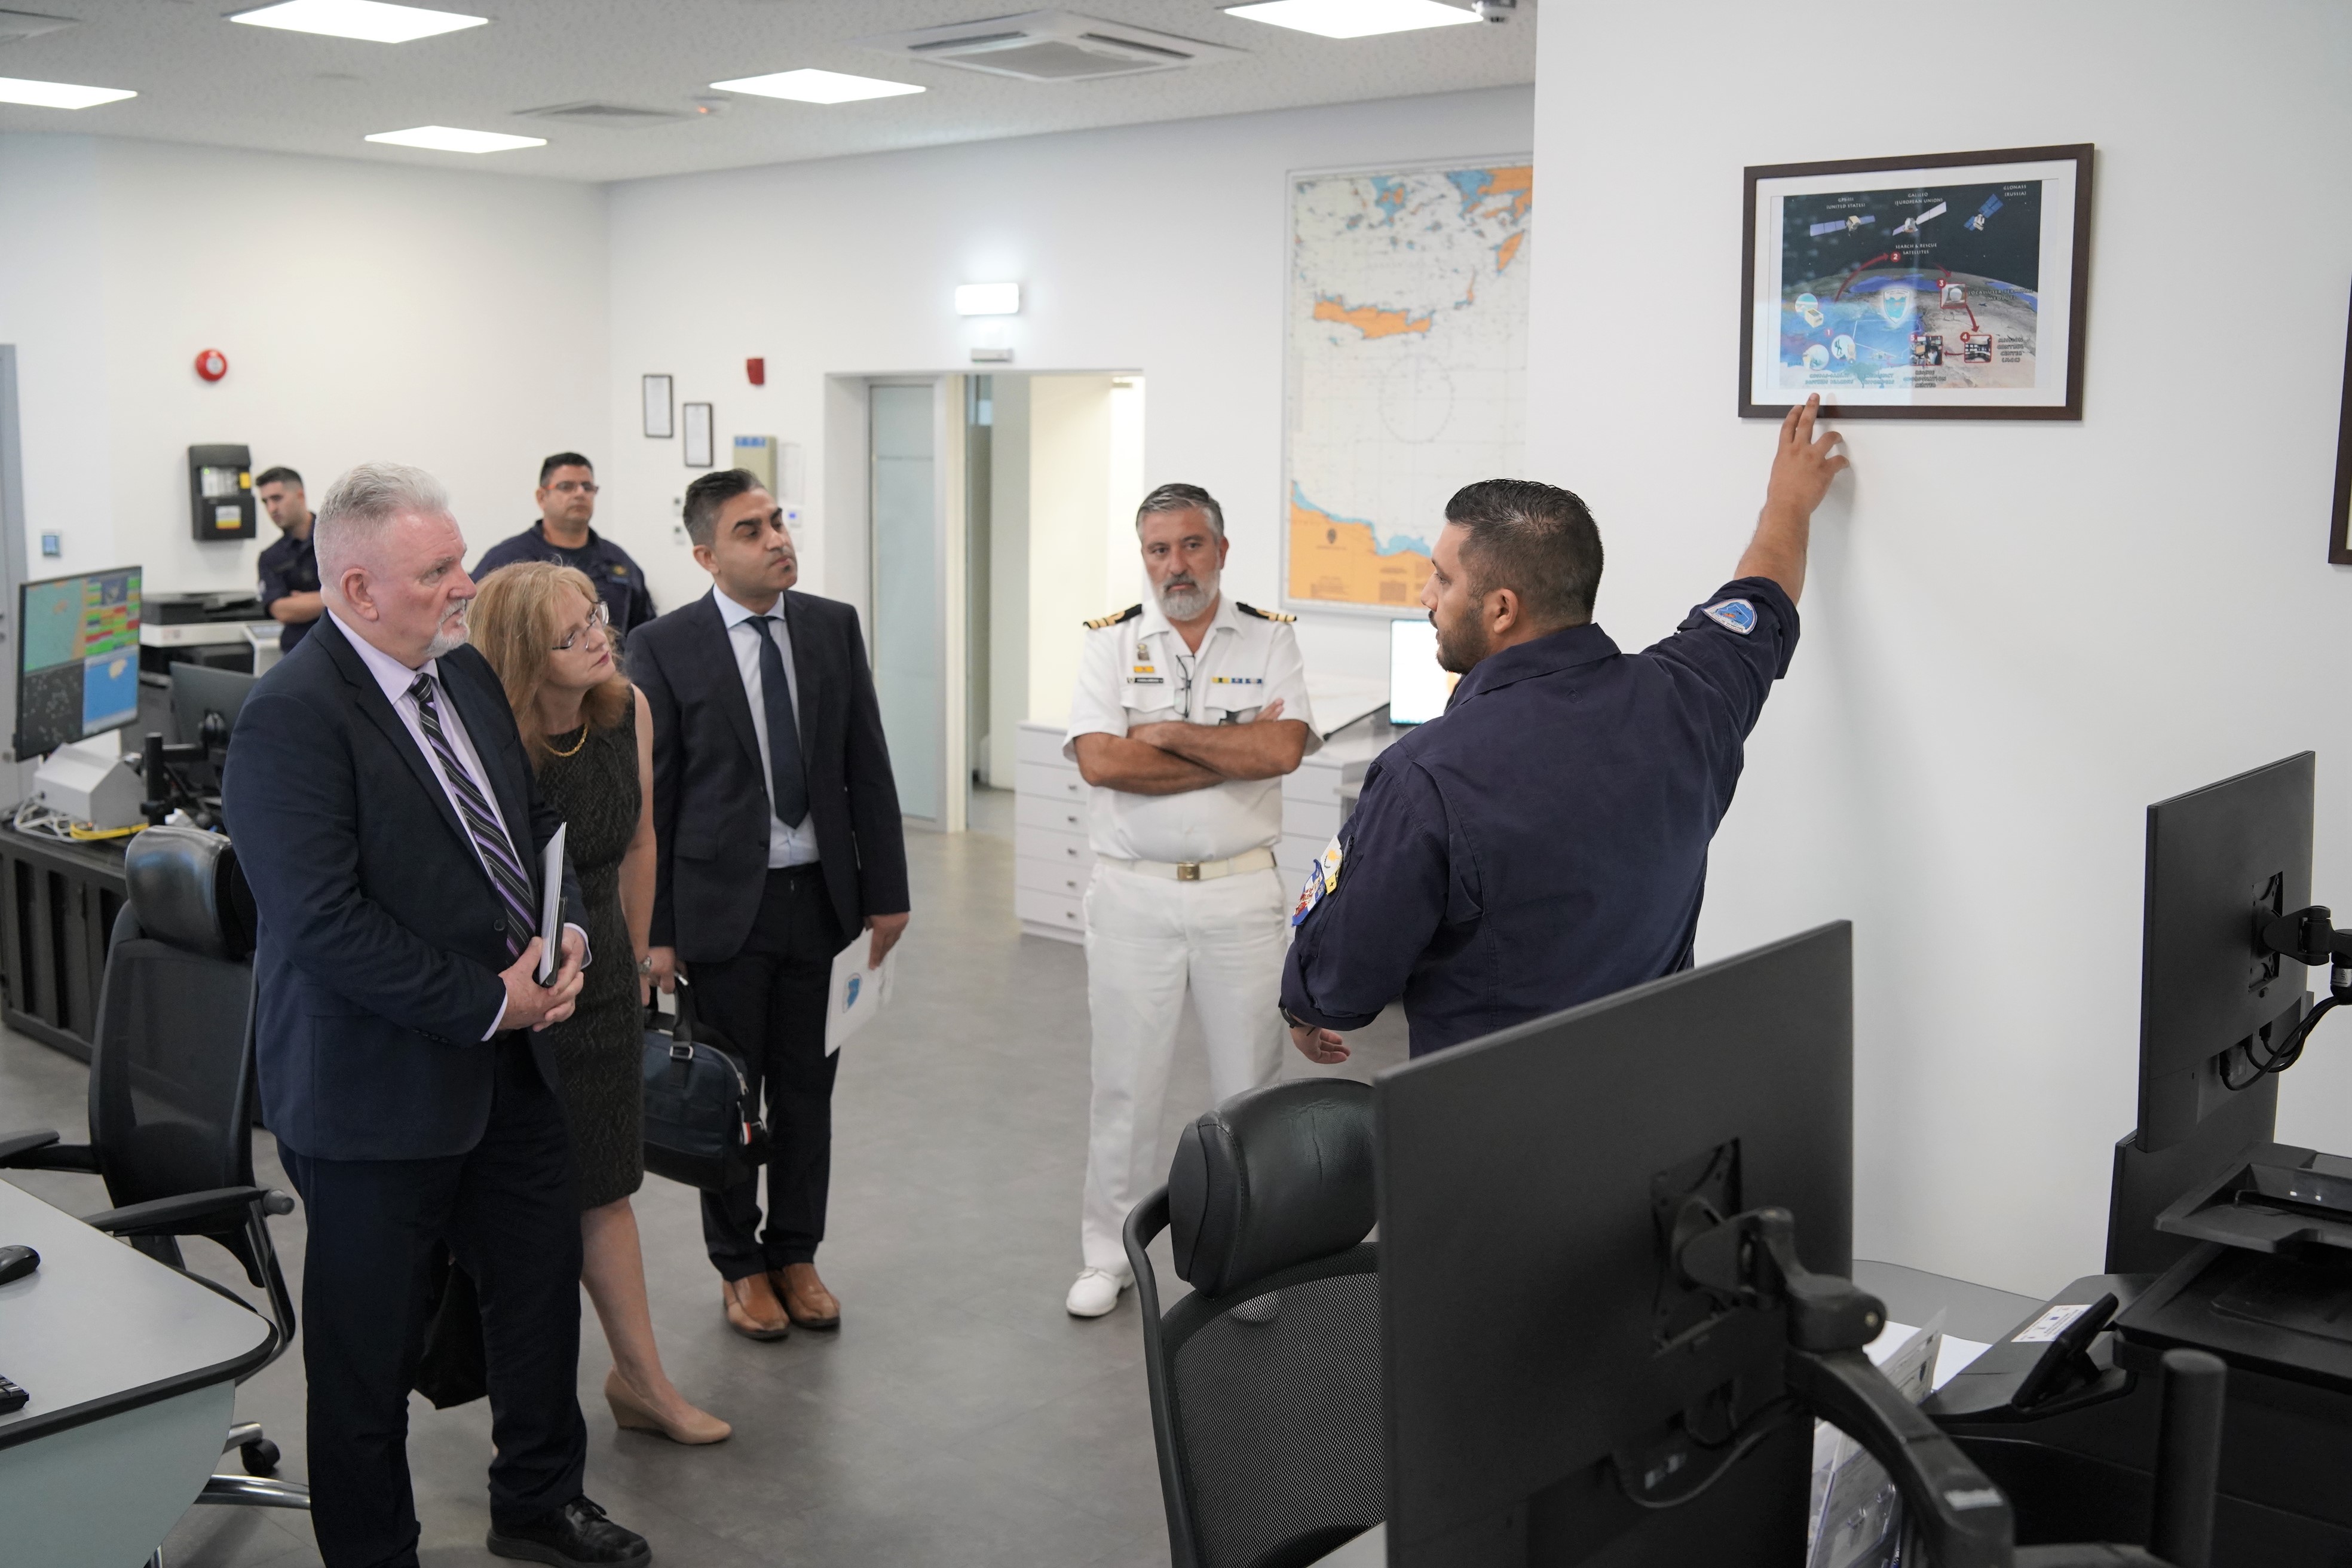 THE HIGH COMMISSIONER OF AUSTRALIA IN CYPRUS VISITS THE JRCC